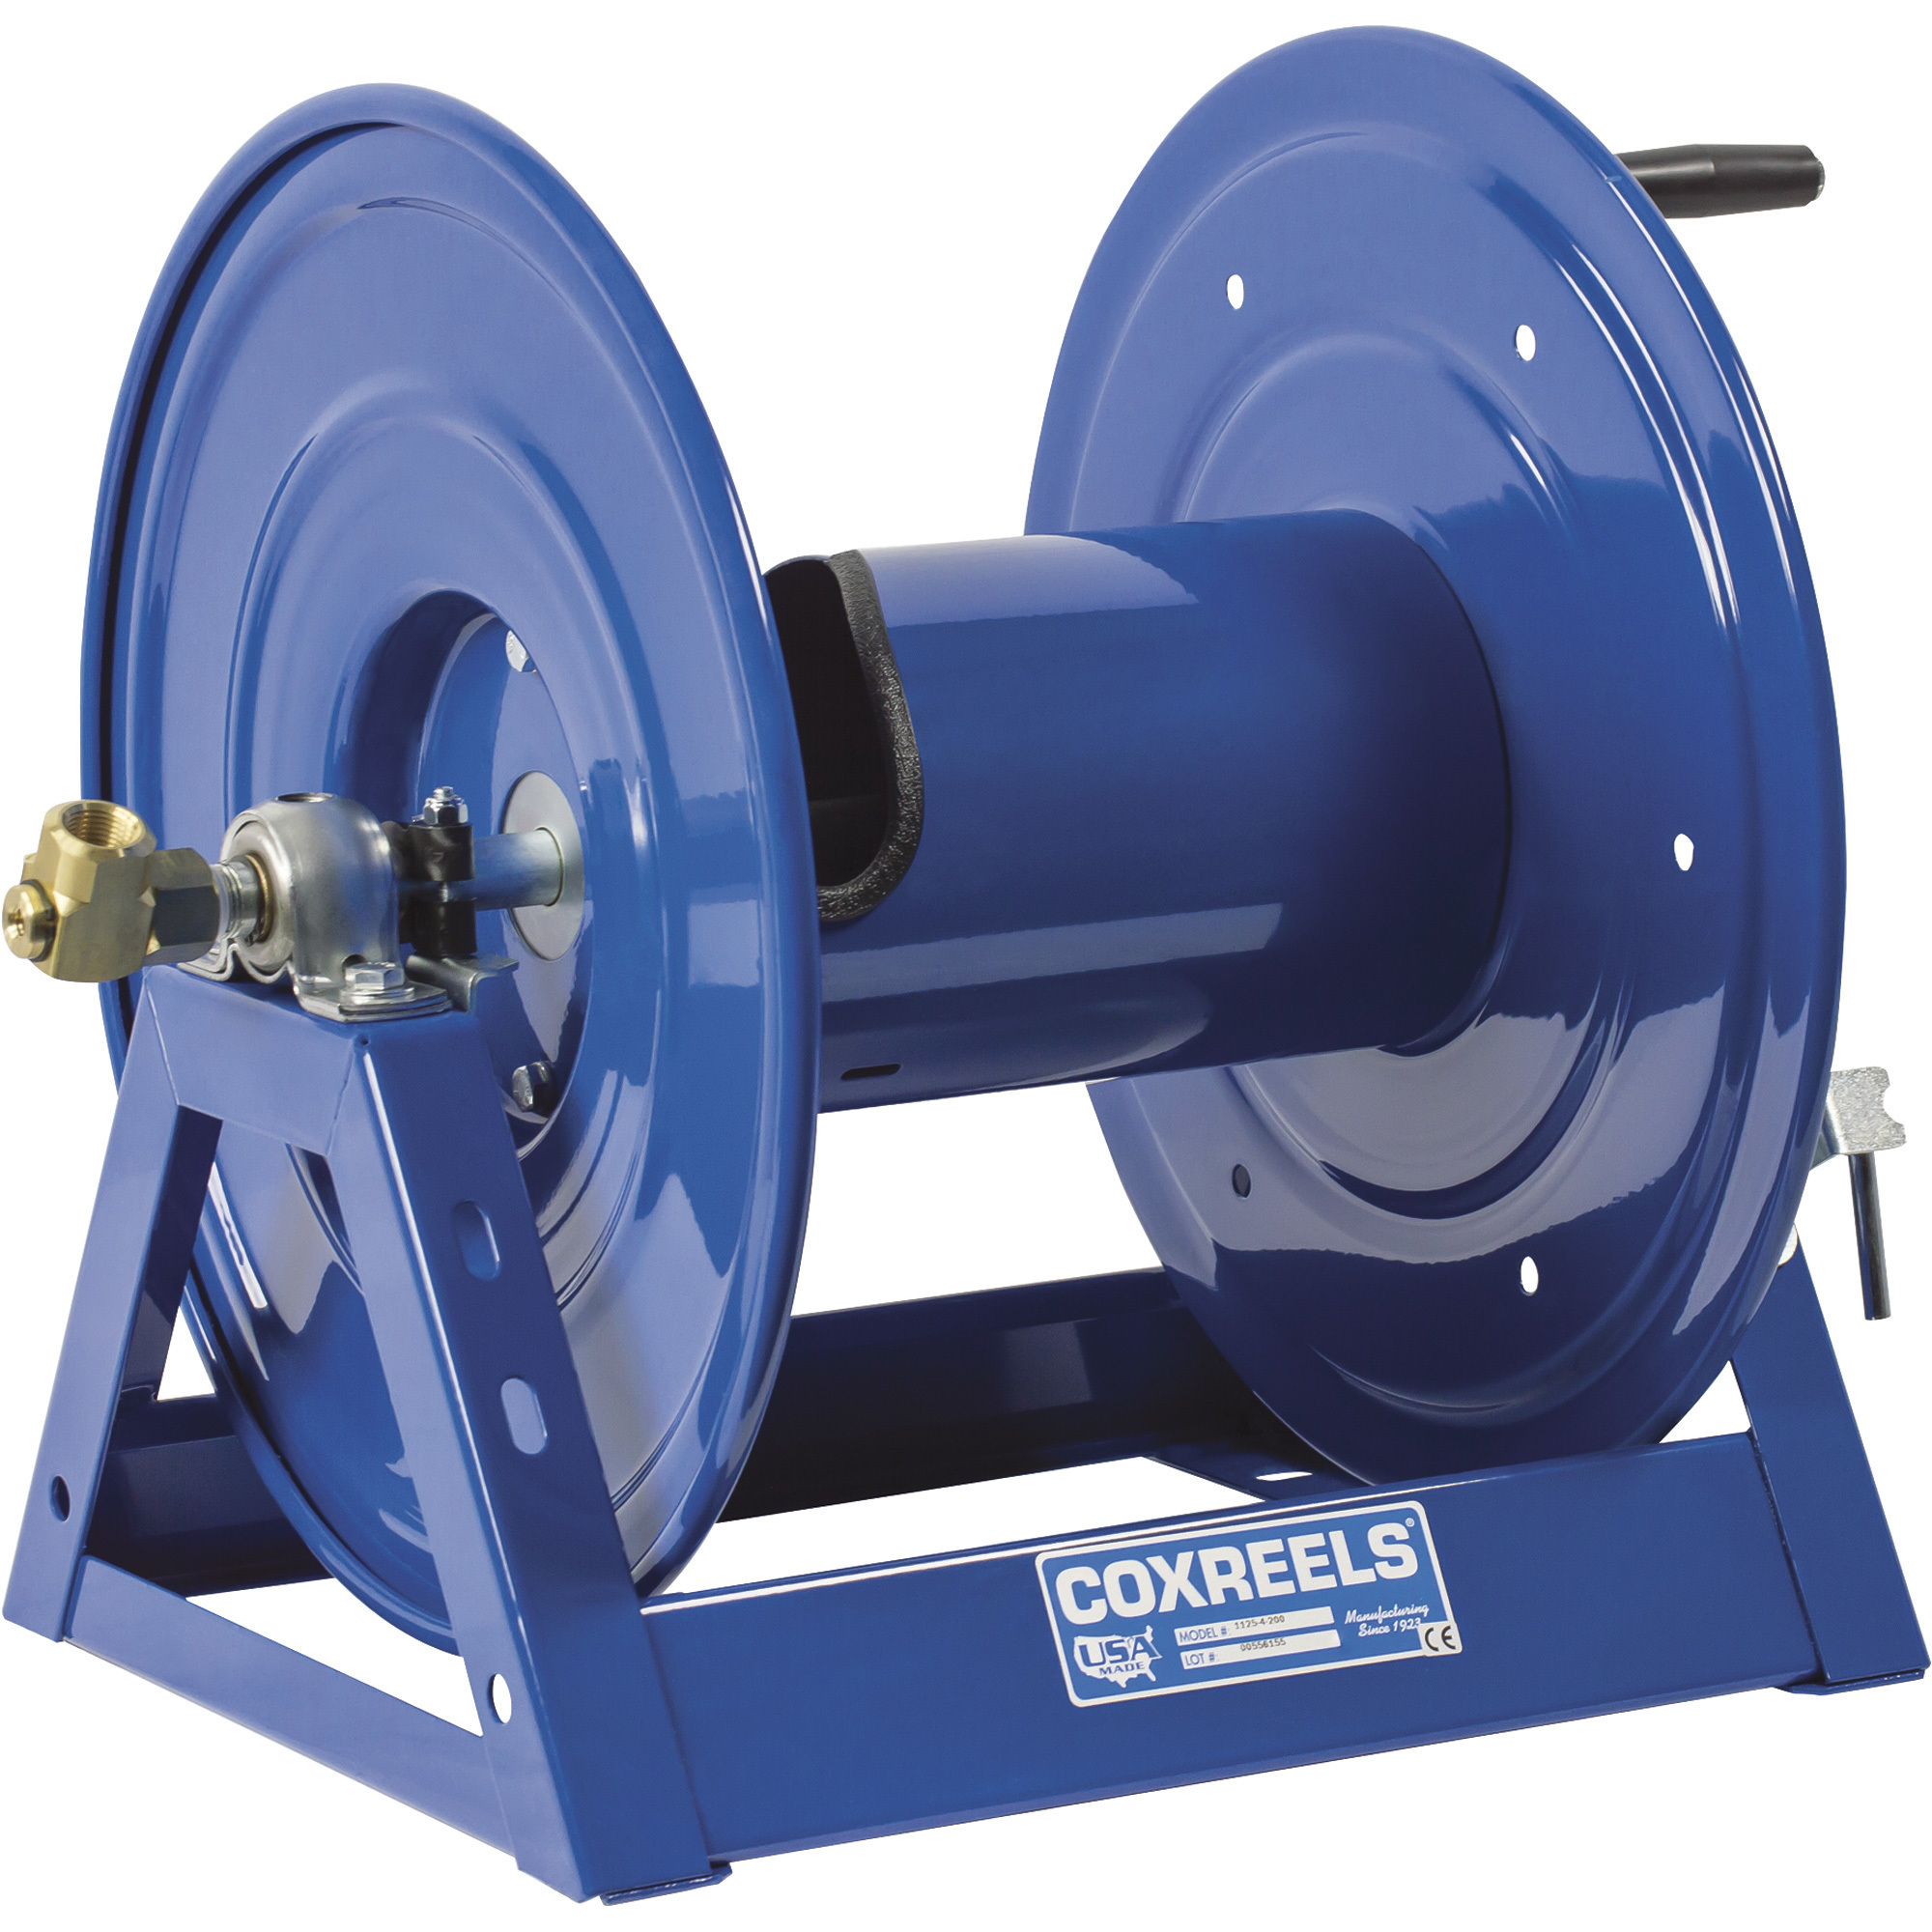 Coxreels 1125 Series Hand-Crank Hose Reel, Holds 3/4in. x 250ft. Hose, Max.  3000 PSI, Model# 1125-5-250